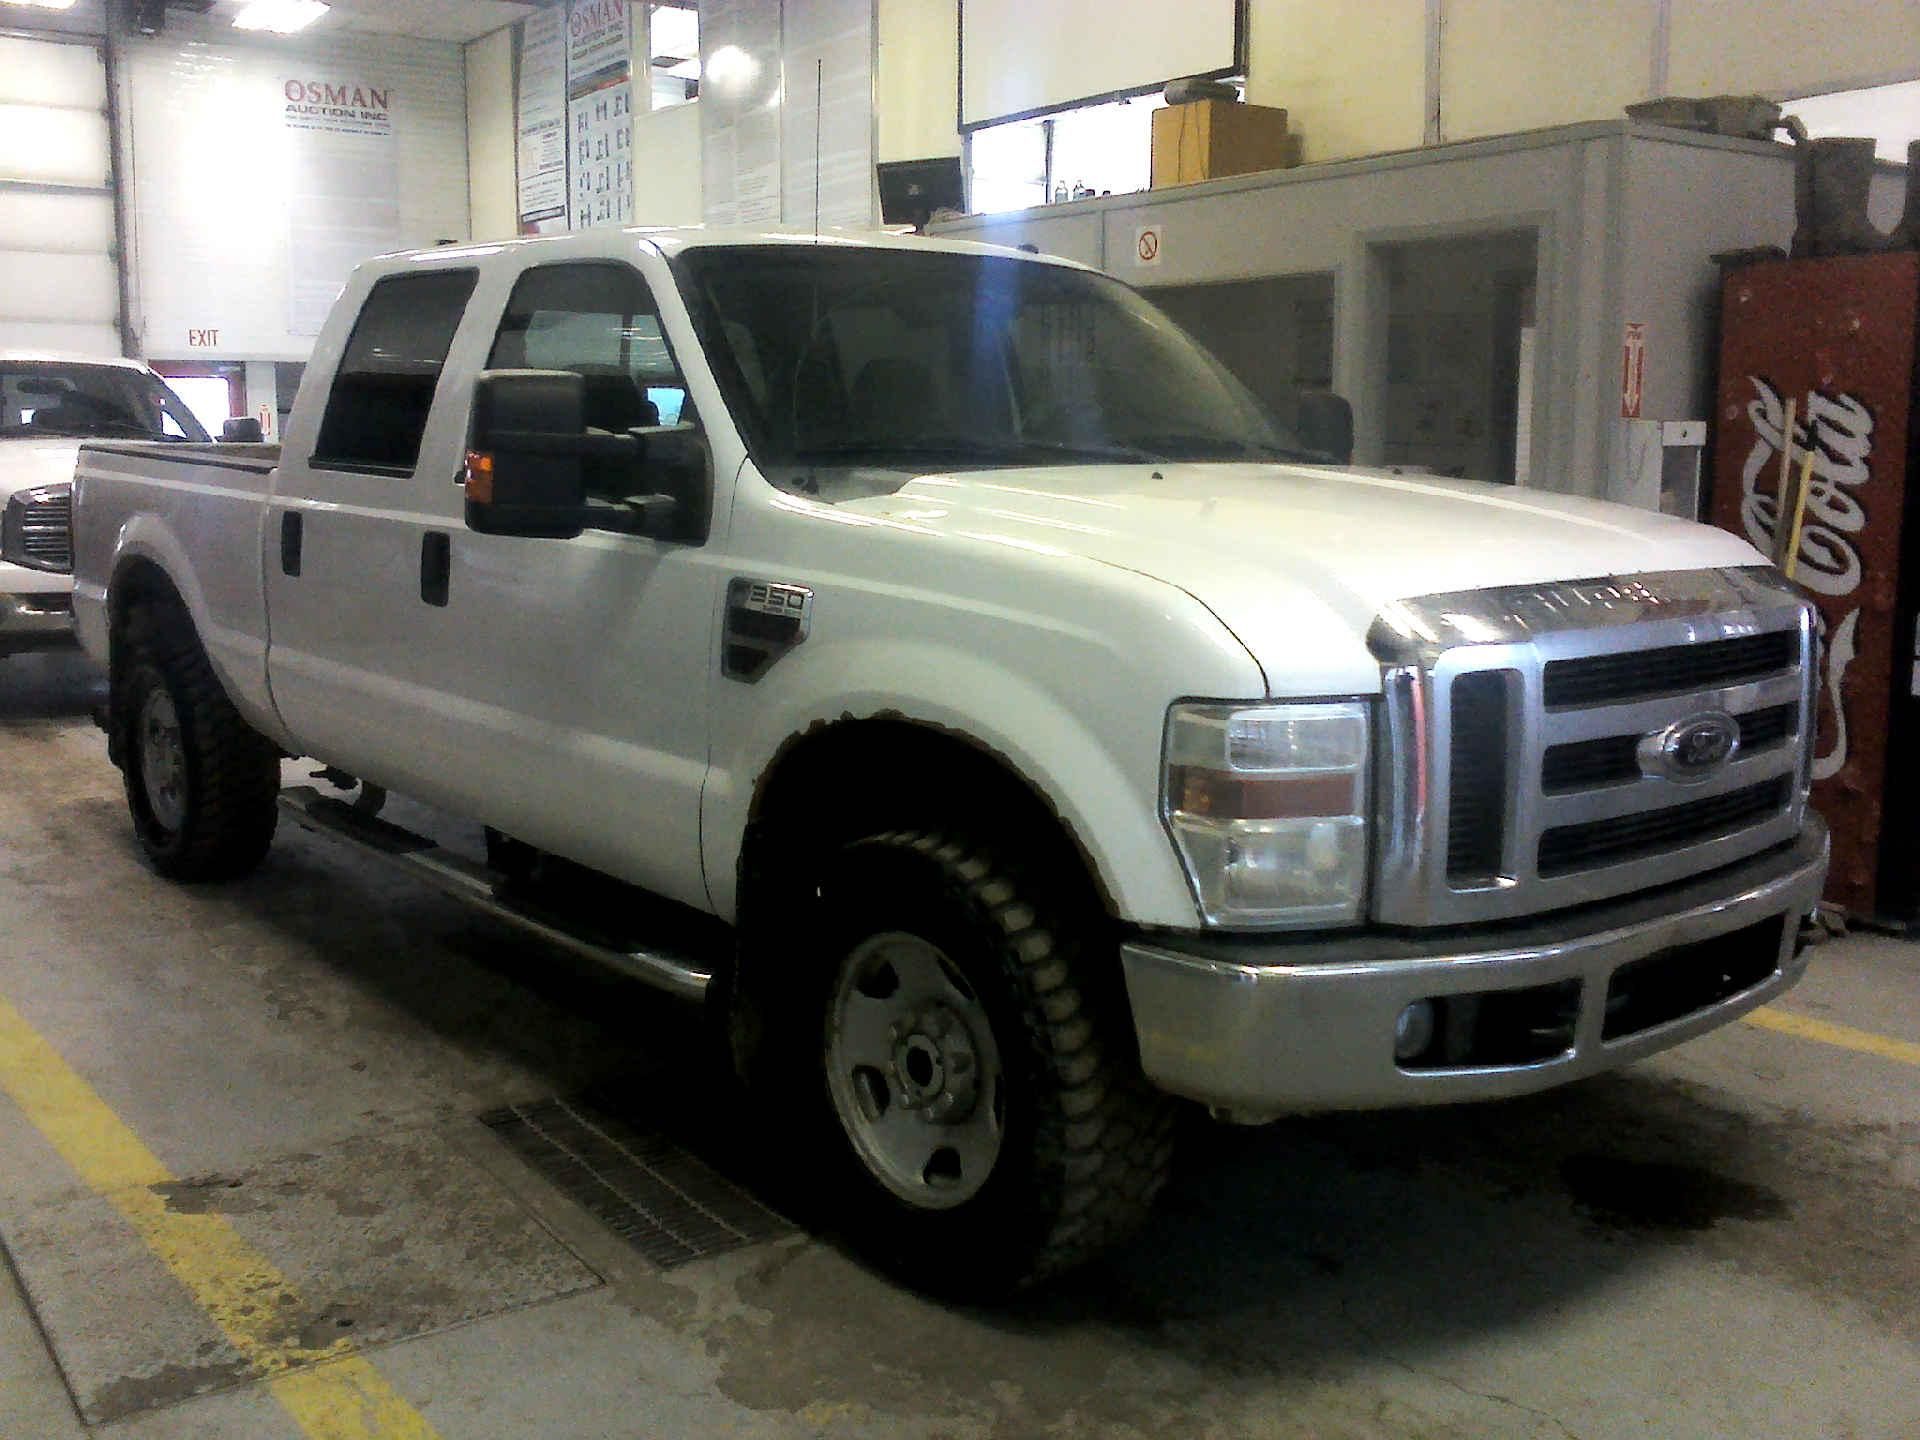 2008 FORD F-350 SD XLT CREW CAB 4WD 6.4L V8 OHV 32V TURBO DIESEL AUTOMATIC SN:1FTWW31R88EE34866 - Image 3 of 9